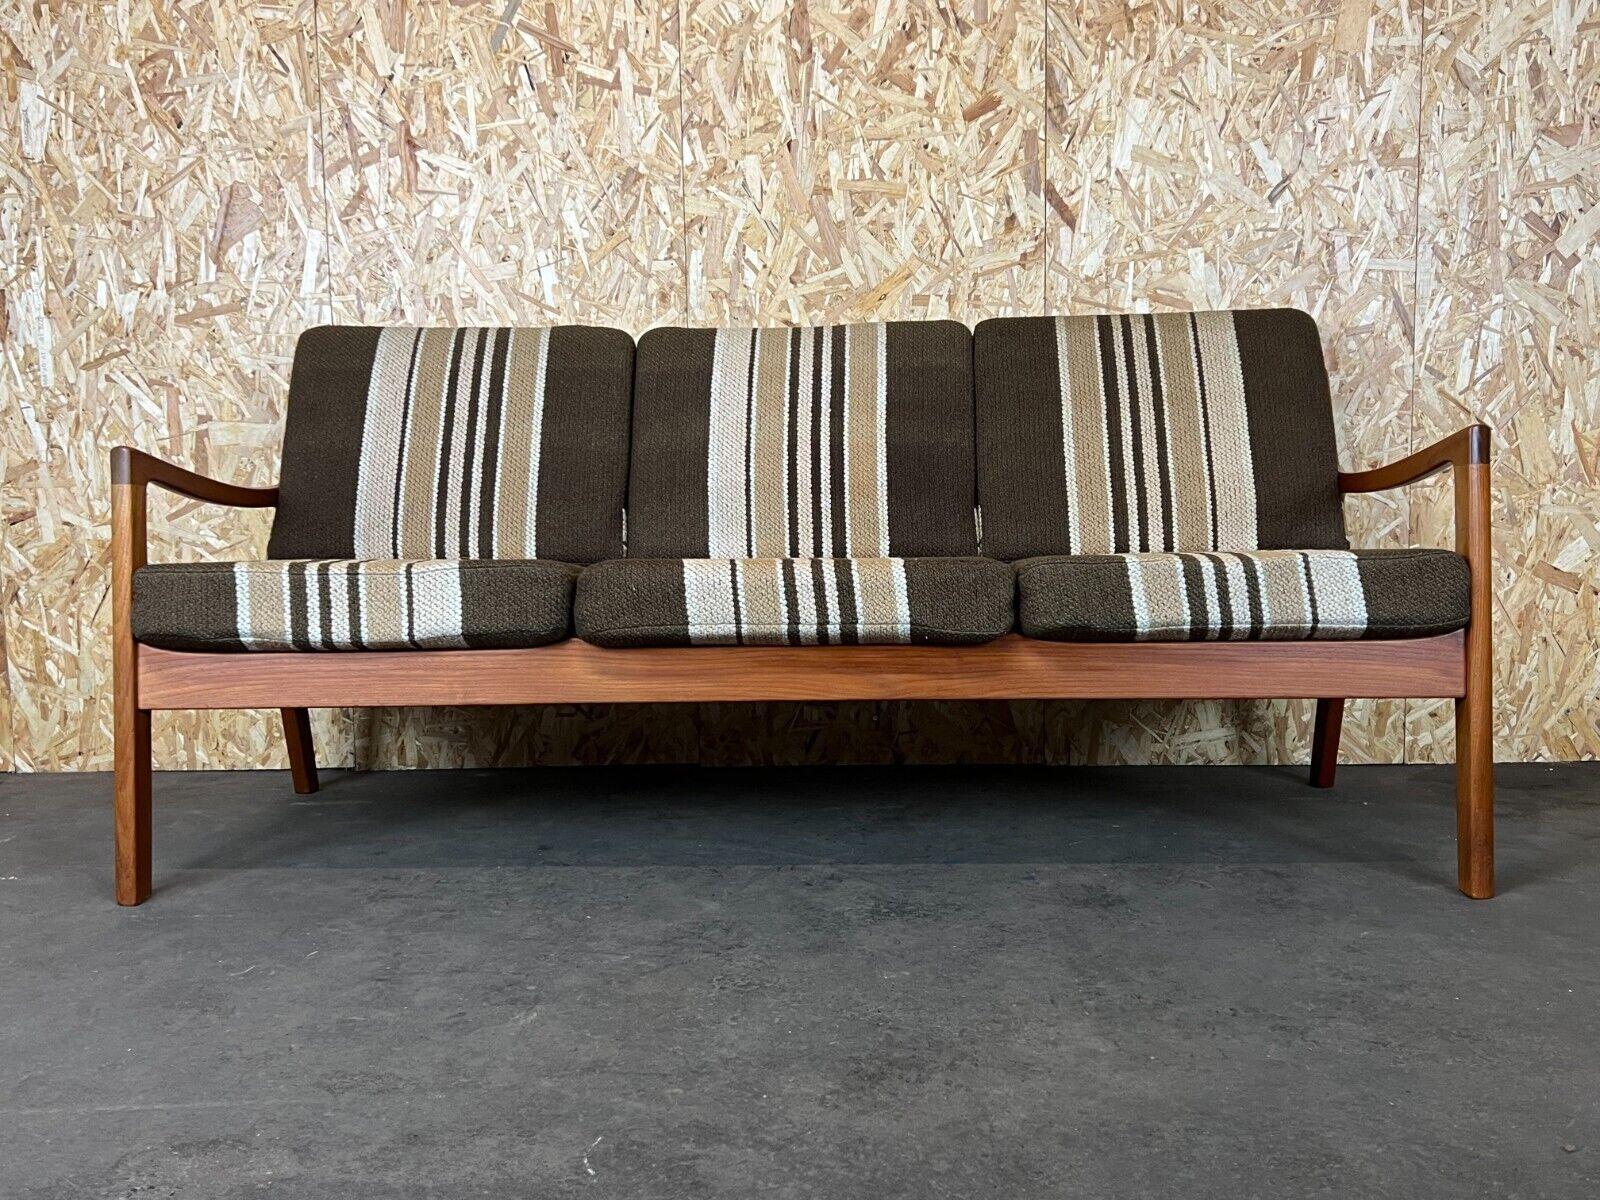 60s 70s teak 3 seater sofa couch Ole Wanscher Cado France & Son Danish design

Object: 3 seater sofa

Manufacturer: Cado (France & Son)

Condition: good - vintage

Age: around 1960-1970

Dimensions:

Width = 182cm
Depth = 75cm
Height =